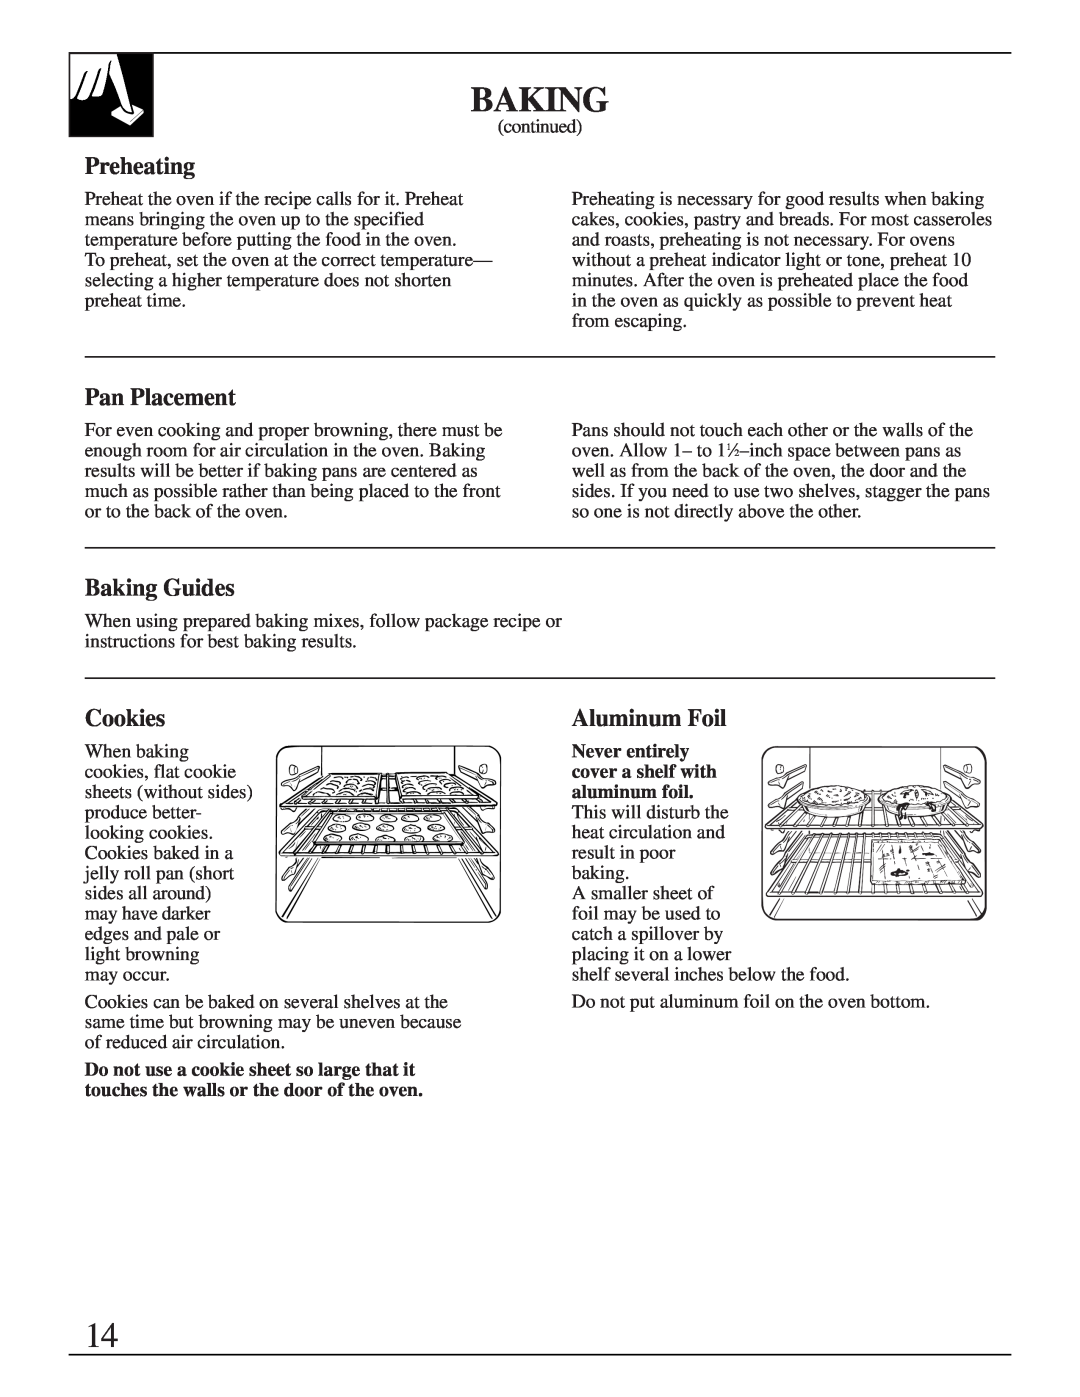 GE XL44TM installation instructions Preheating, Pan Placement, Baking Guides, Cookies, Aluminum Foil, Never entirely 